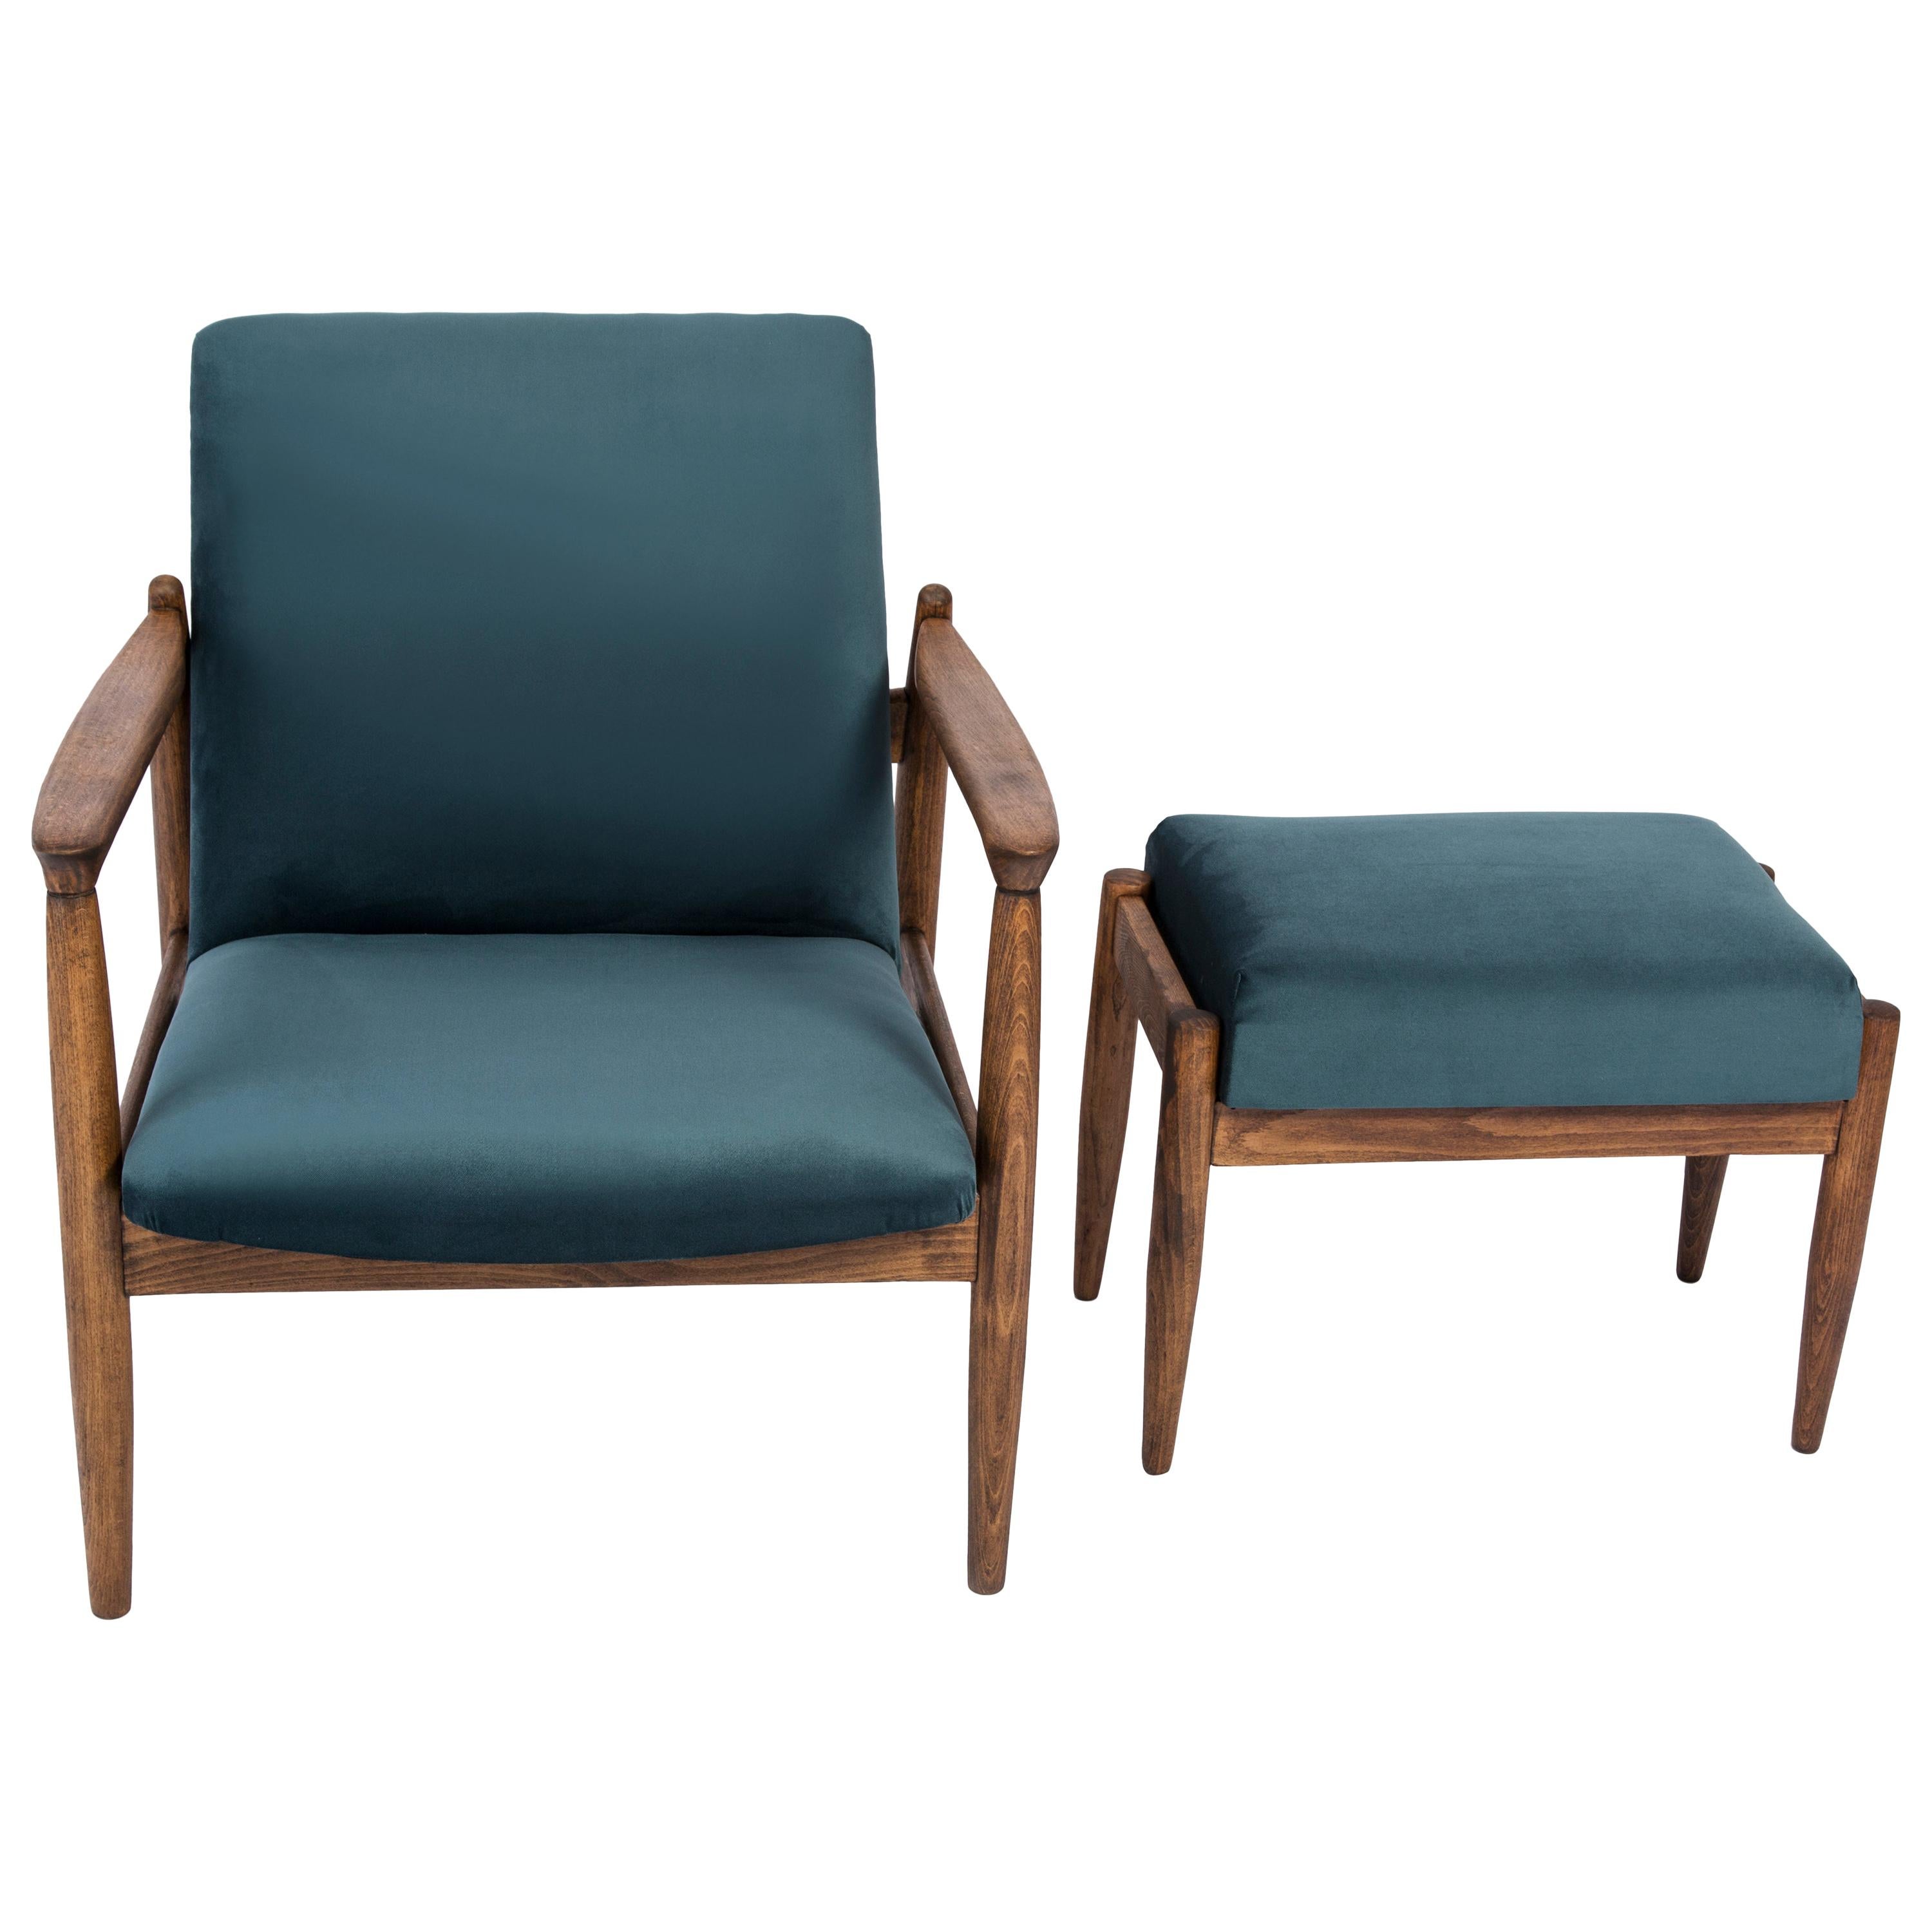 Set of Petrol Blue Vintage Armchair and Stool, Edmund Homa, 1960s For Sale